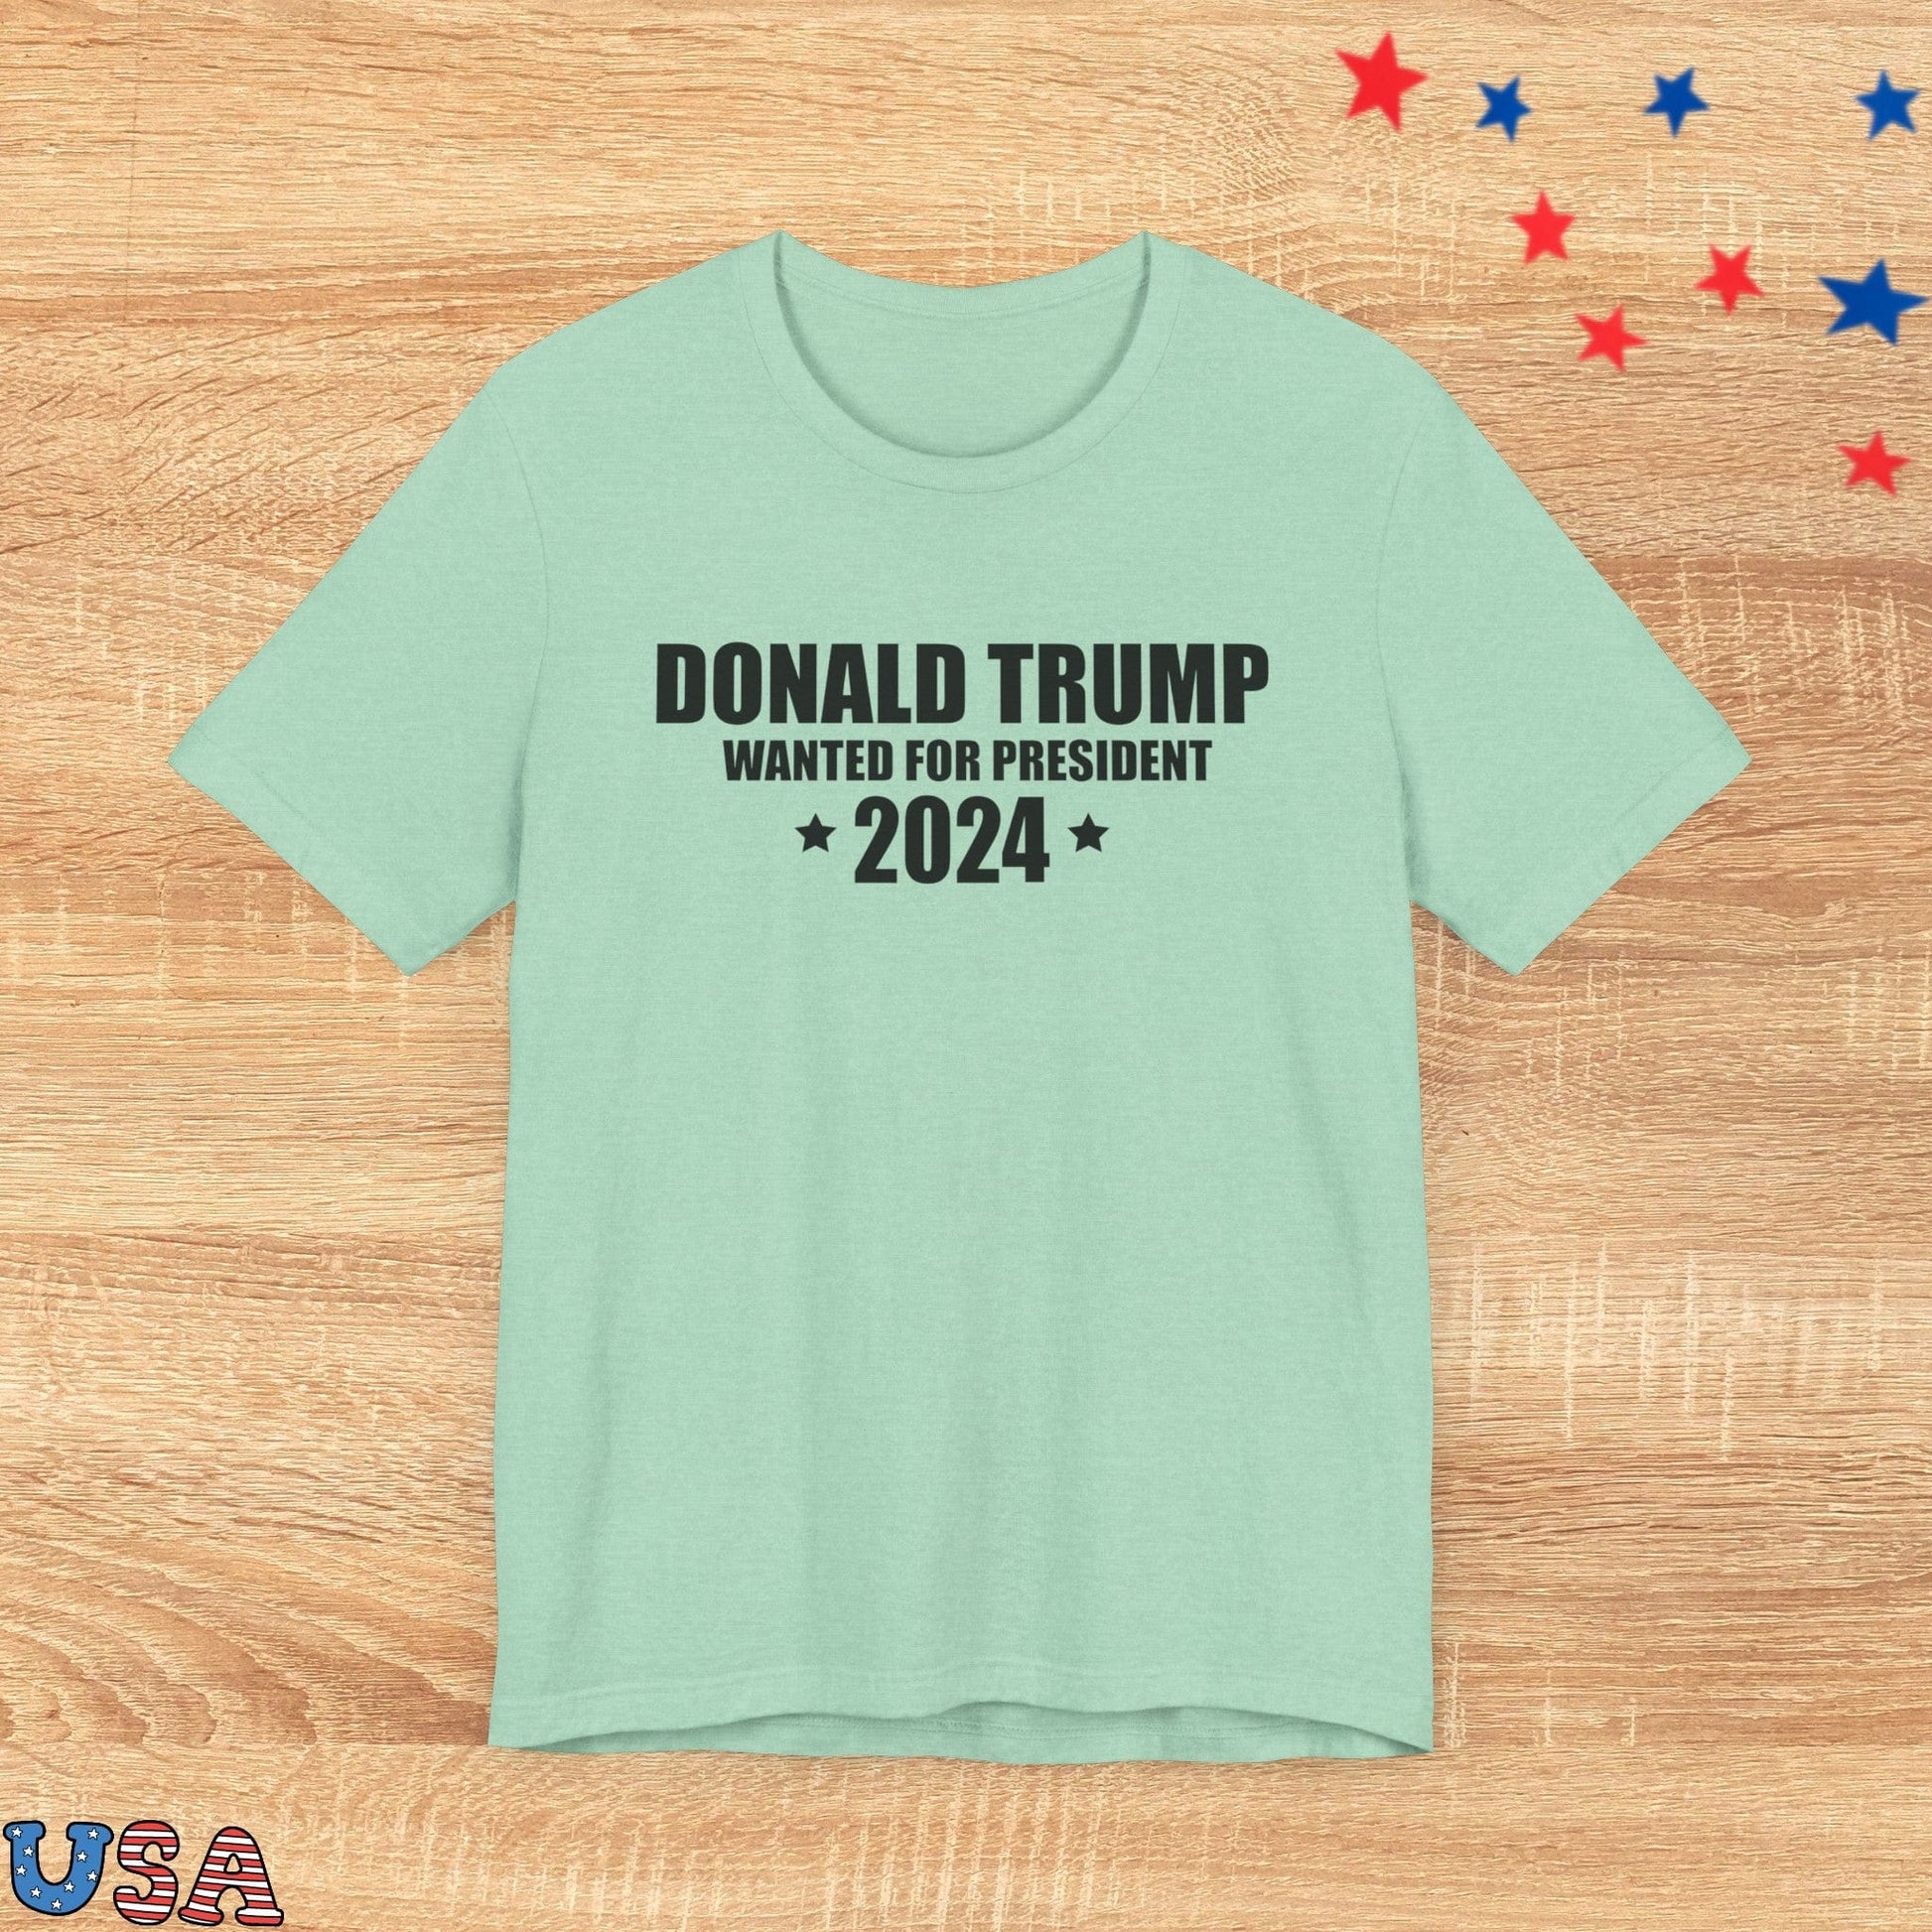 patriotic stars T-Shirt Heather Mint / XS Donald Trump Wanted For President 2024